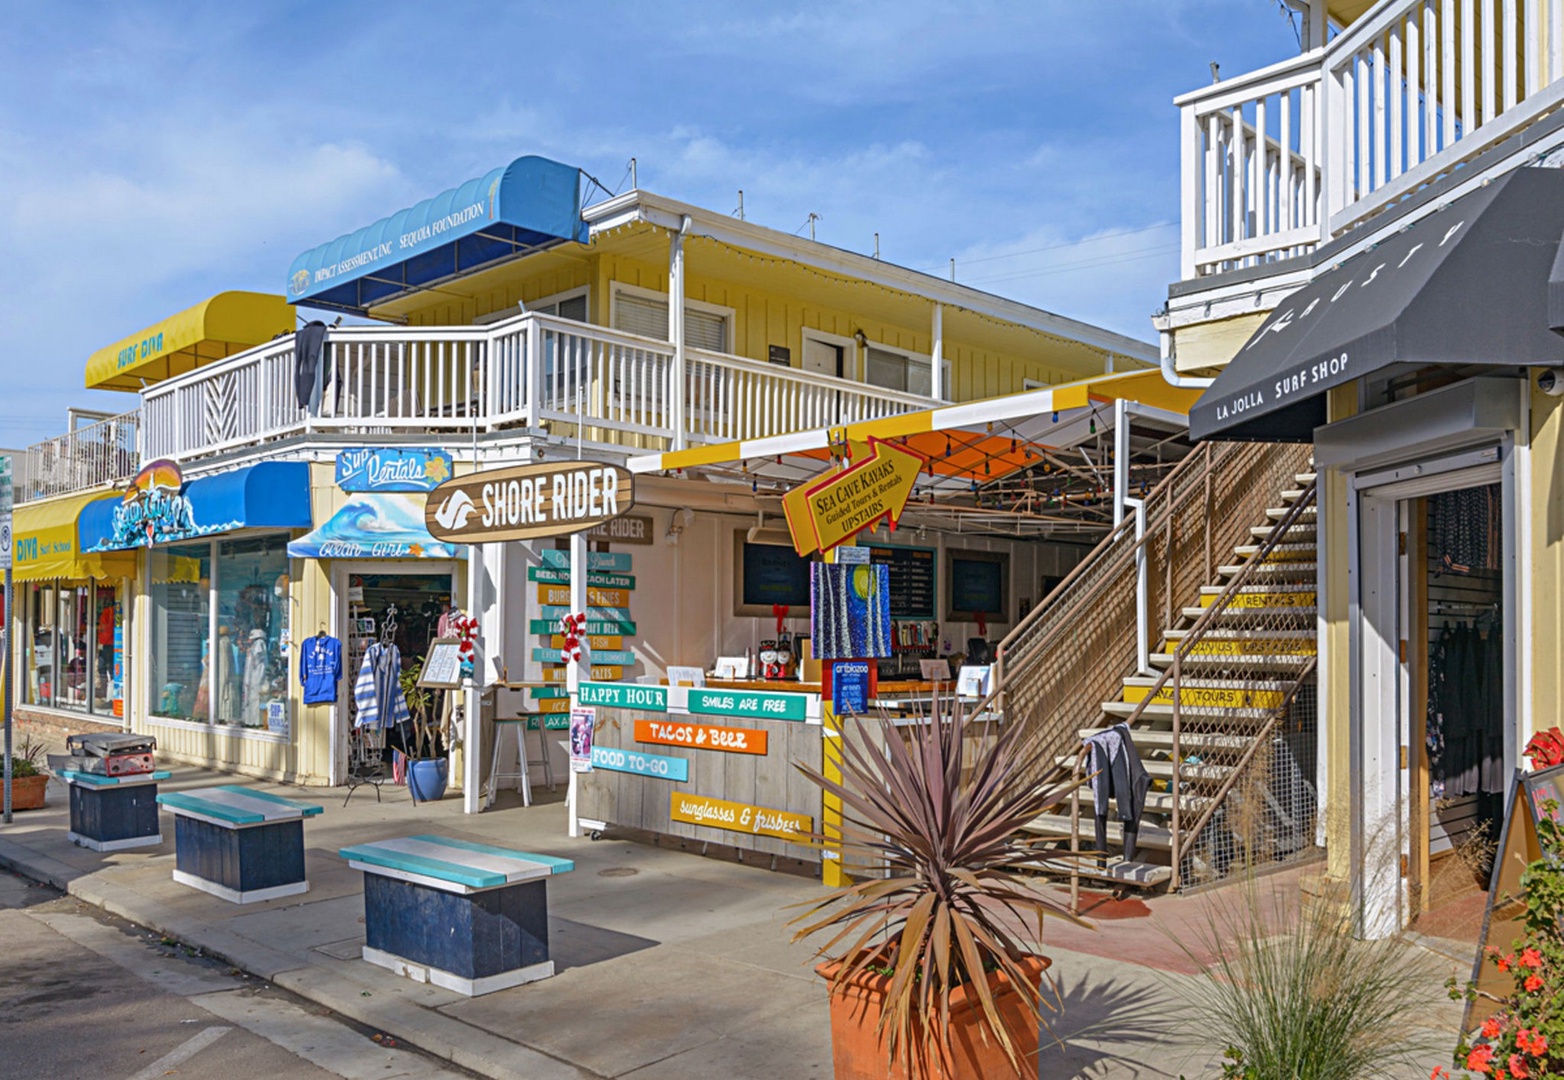 Walk to beach shops and rentals